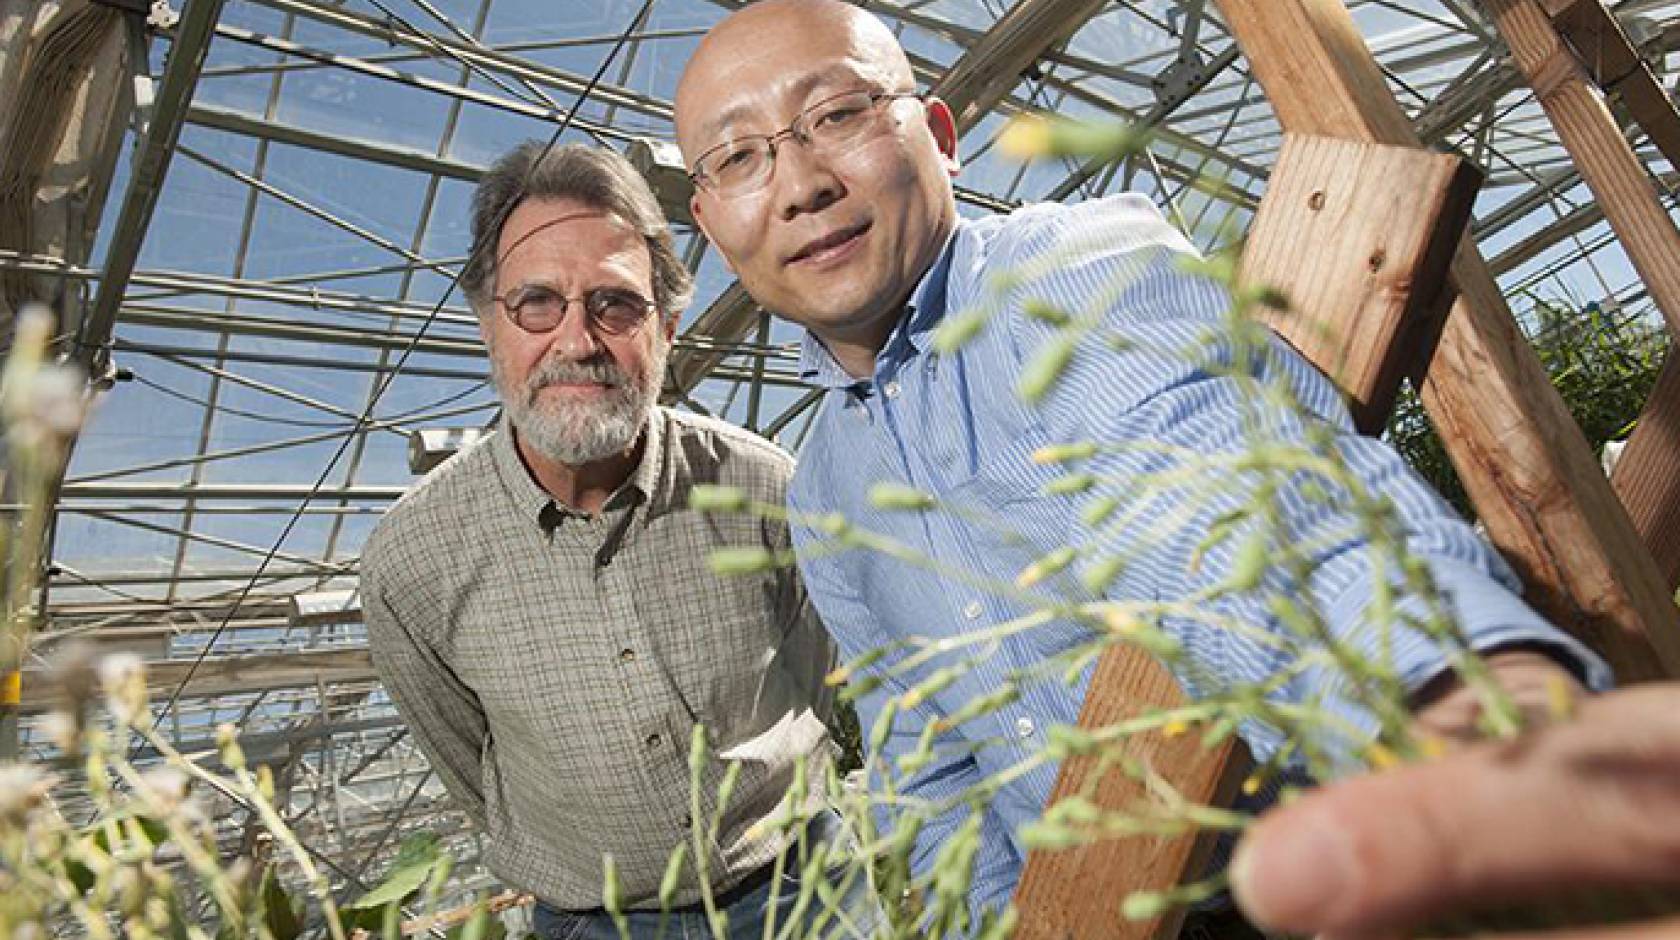 Kent Bradford, left, and Alfred Huo, seen here with a flowering lettuce plant, found that lettuce could be prevented from flowering by increasing the expression of a specific microRNA in the plants. The high levels of this microRNA prevent the plant from 